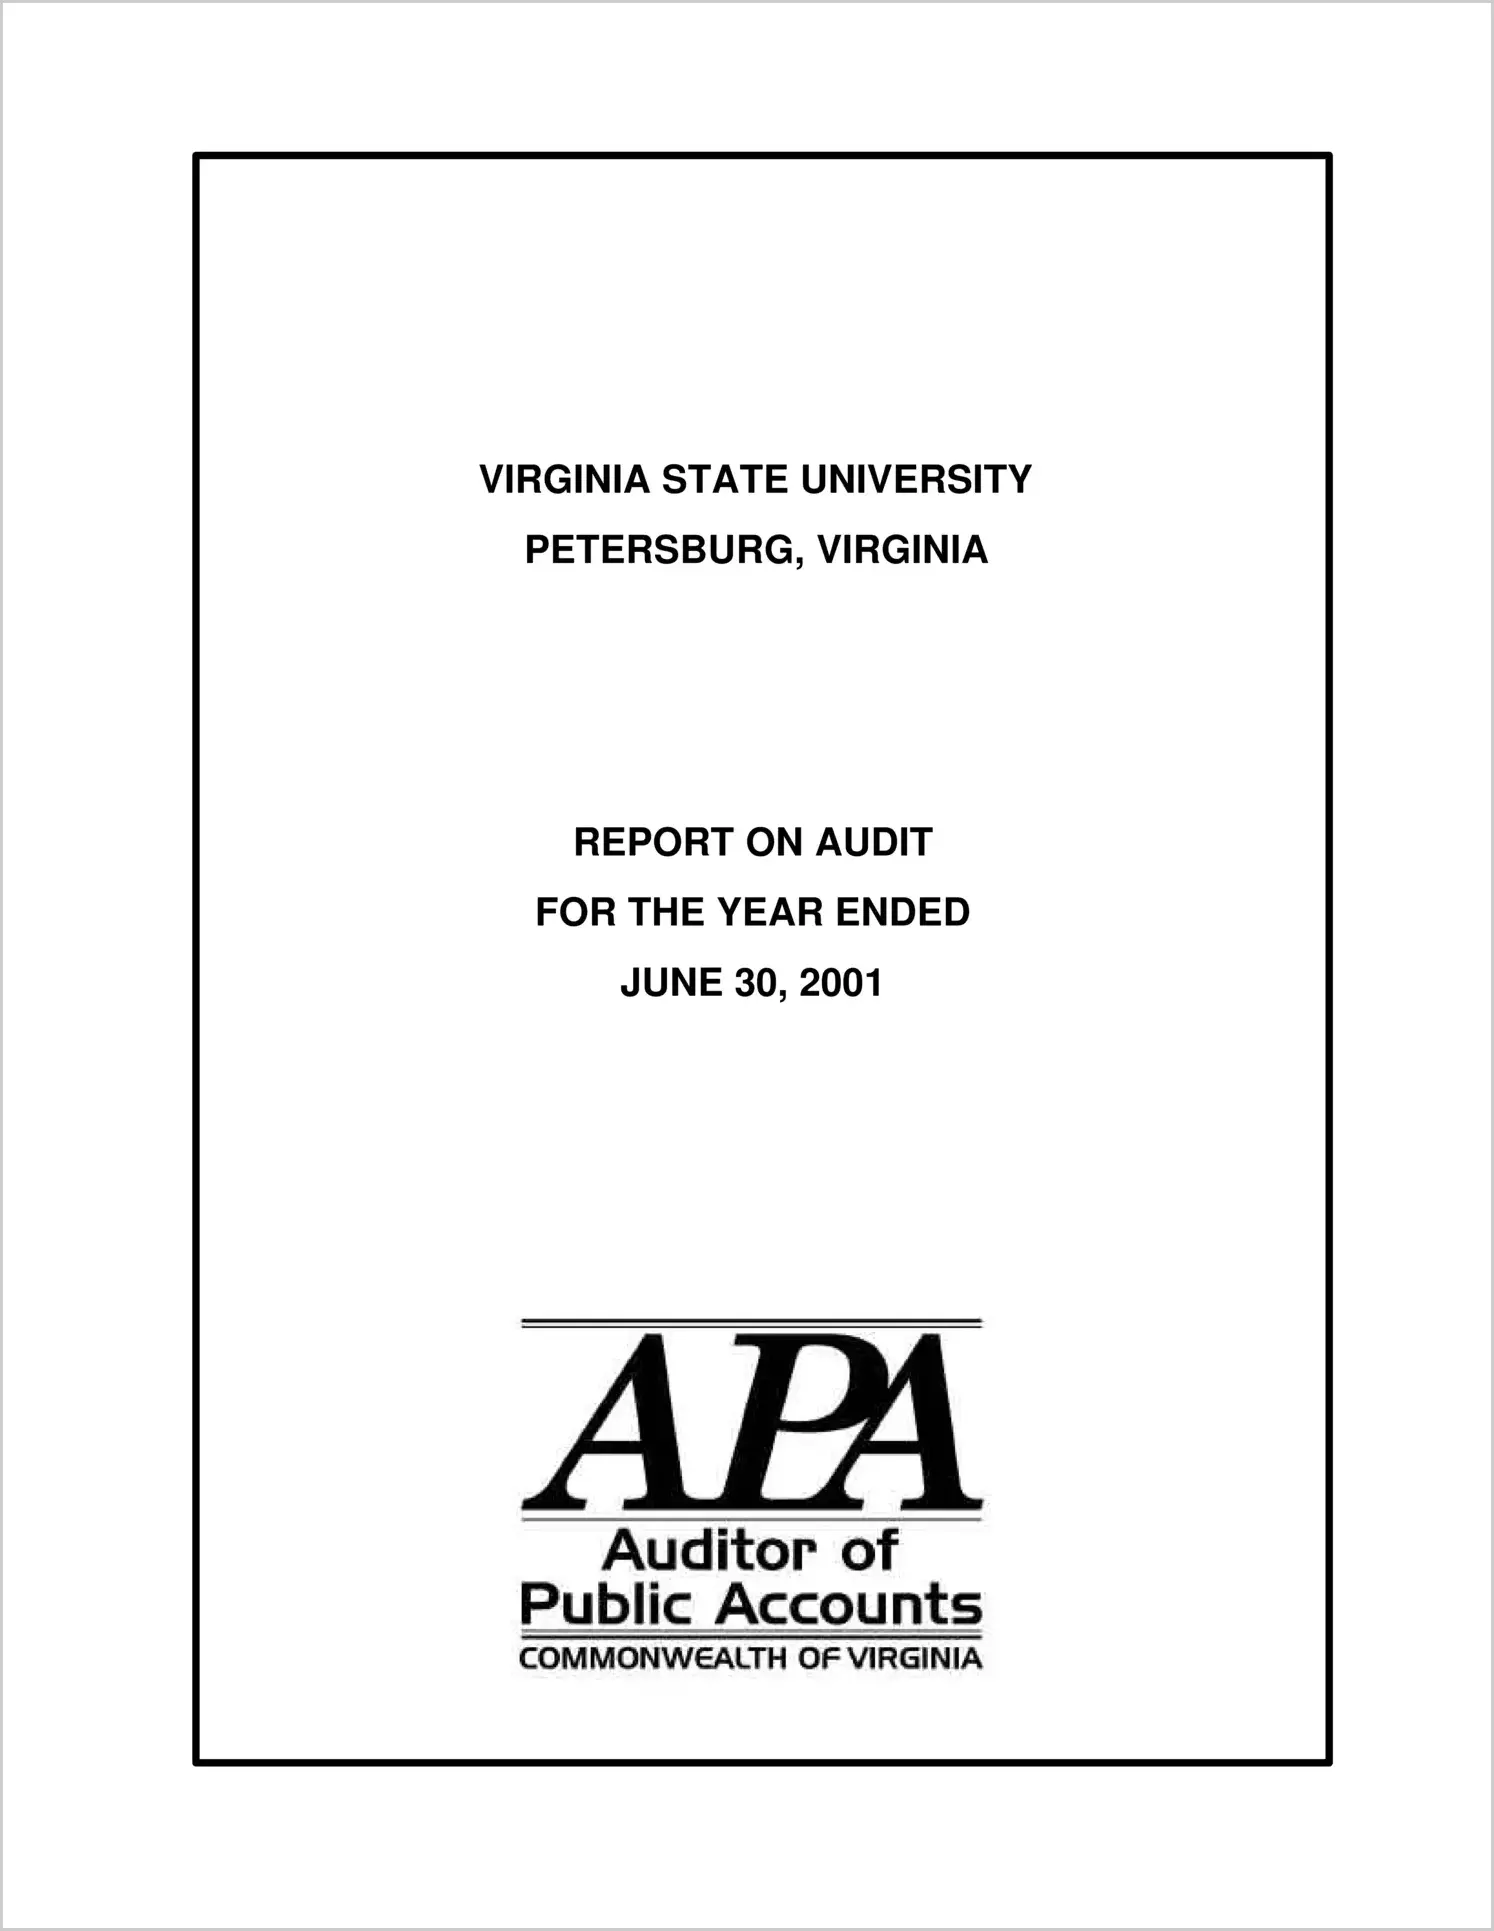 Virginia State University for the year ended June 30, 2001